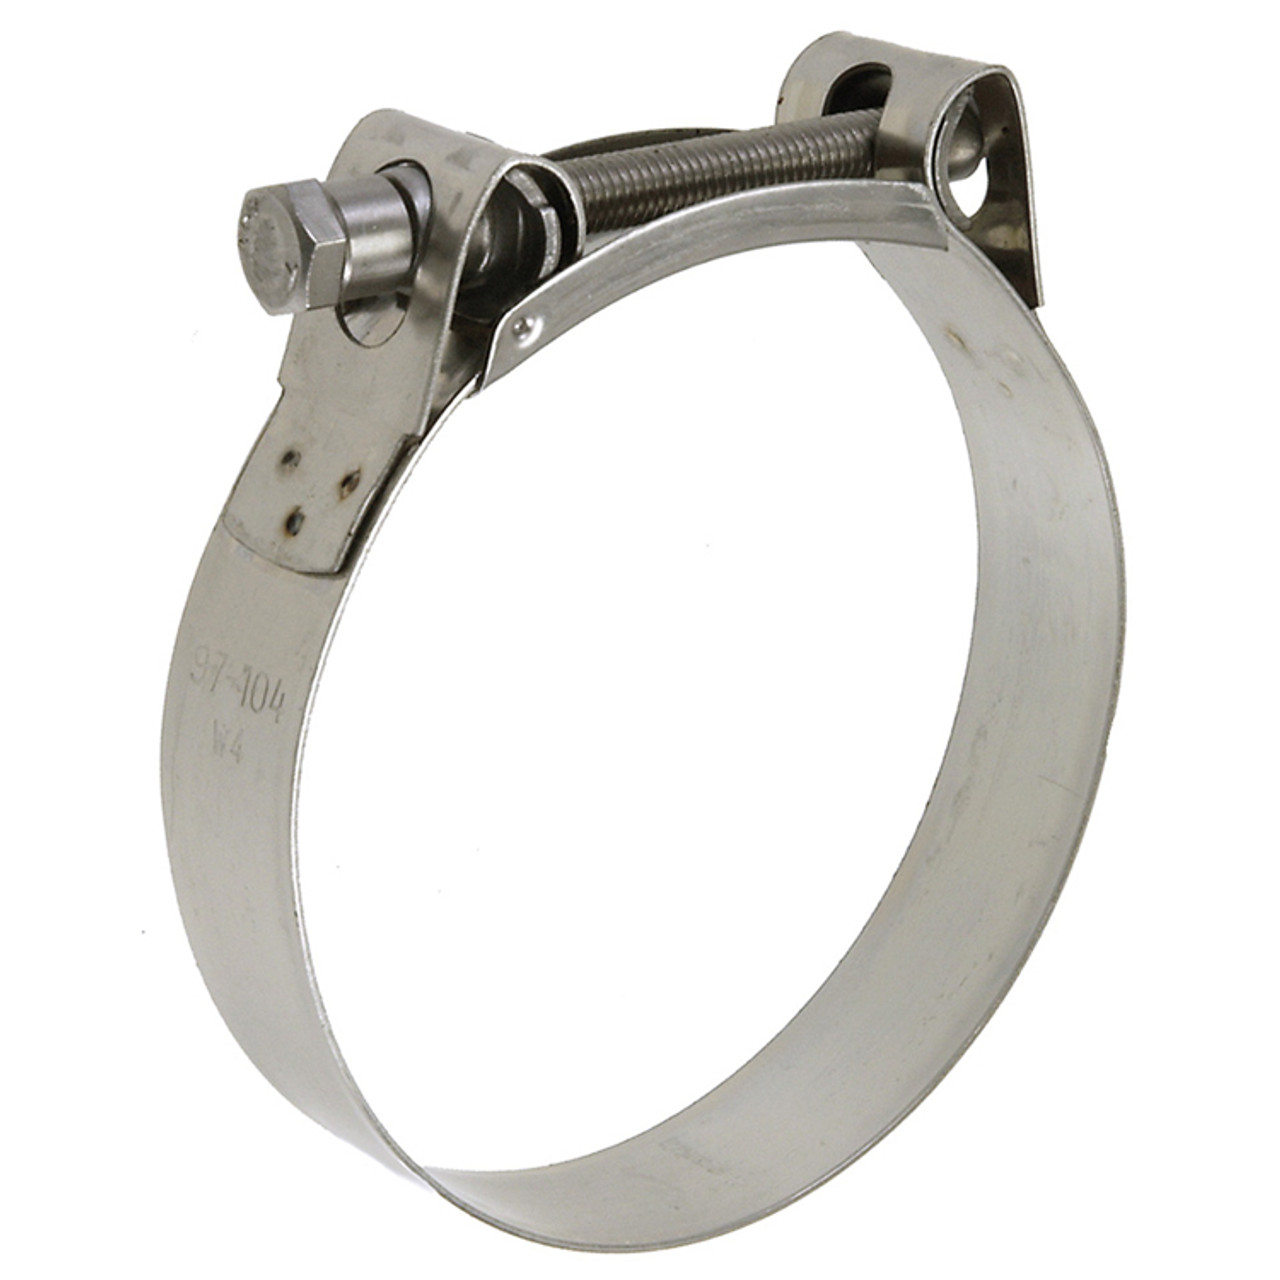 1.69 - 1.85" All Stainless T-Bolt Clamp  G94-4347